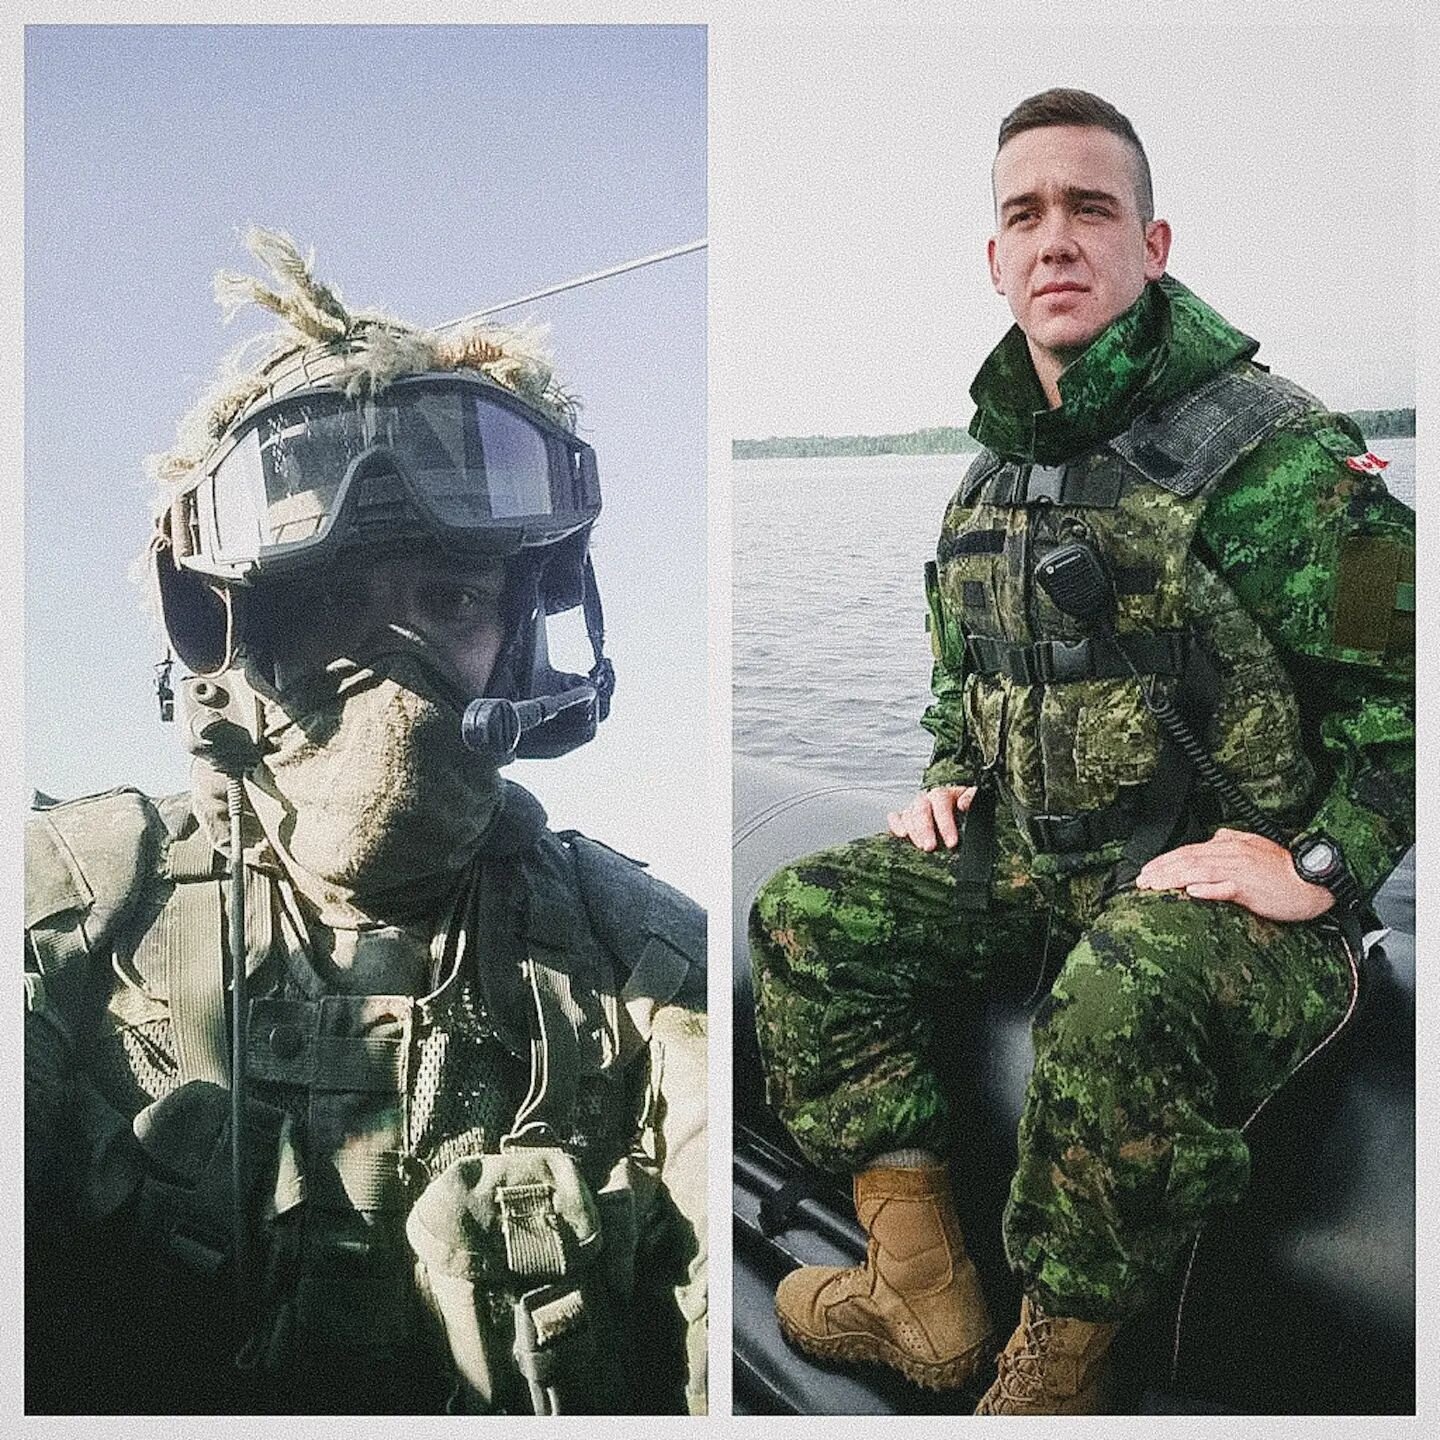 Today we honour canadian service people. Those lost but all those who have served and are serving. We are so proud of our nephew, Jake, who has just finished his 6th year in the Canadian military. We love you and are so proud, Jake.